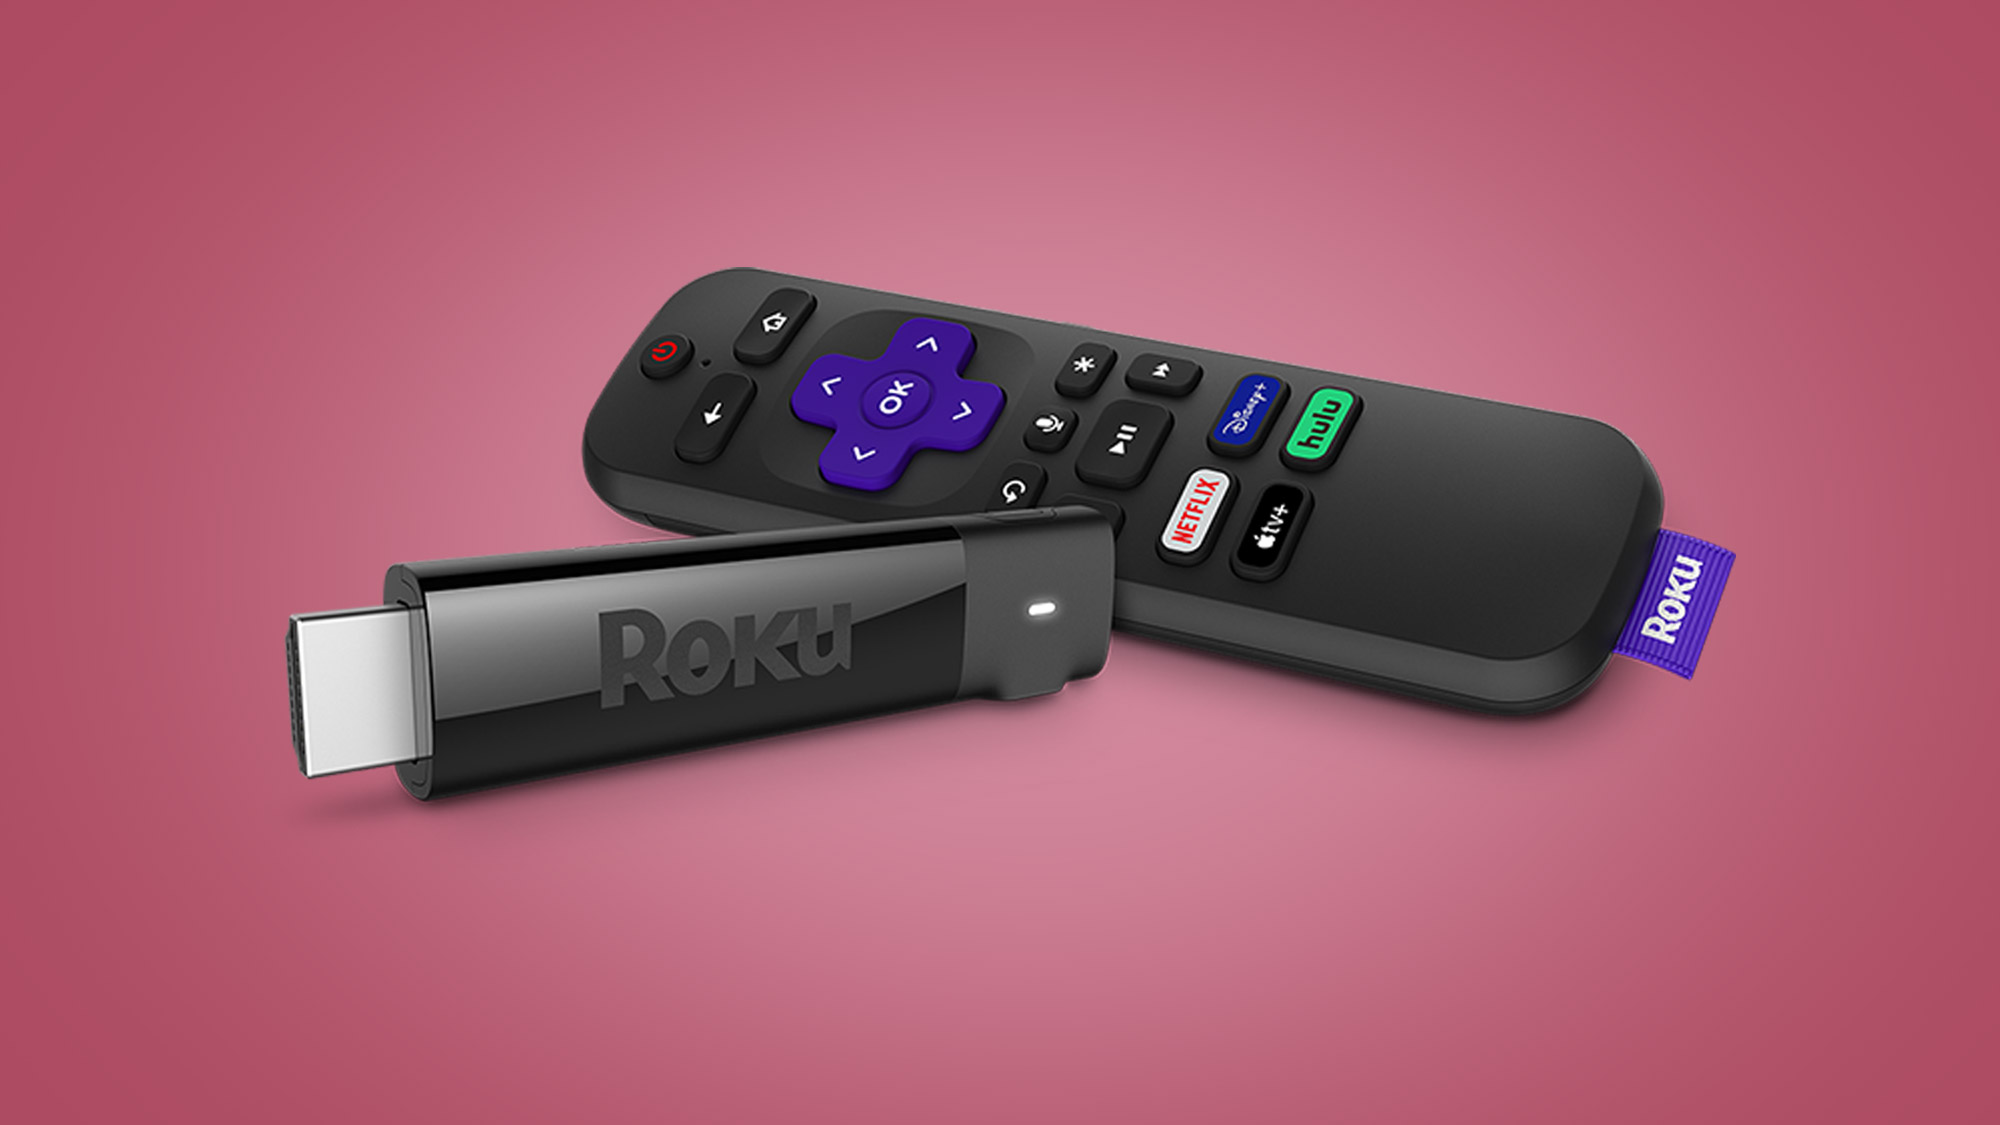 How to connect Roku streaming stick to your Wi-Fi | TechRadar